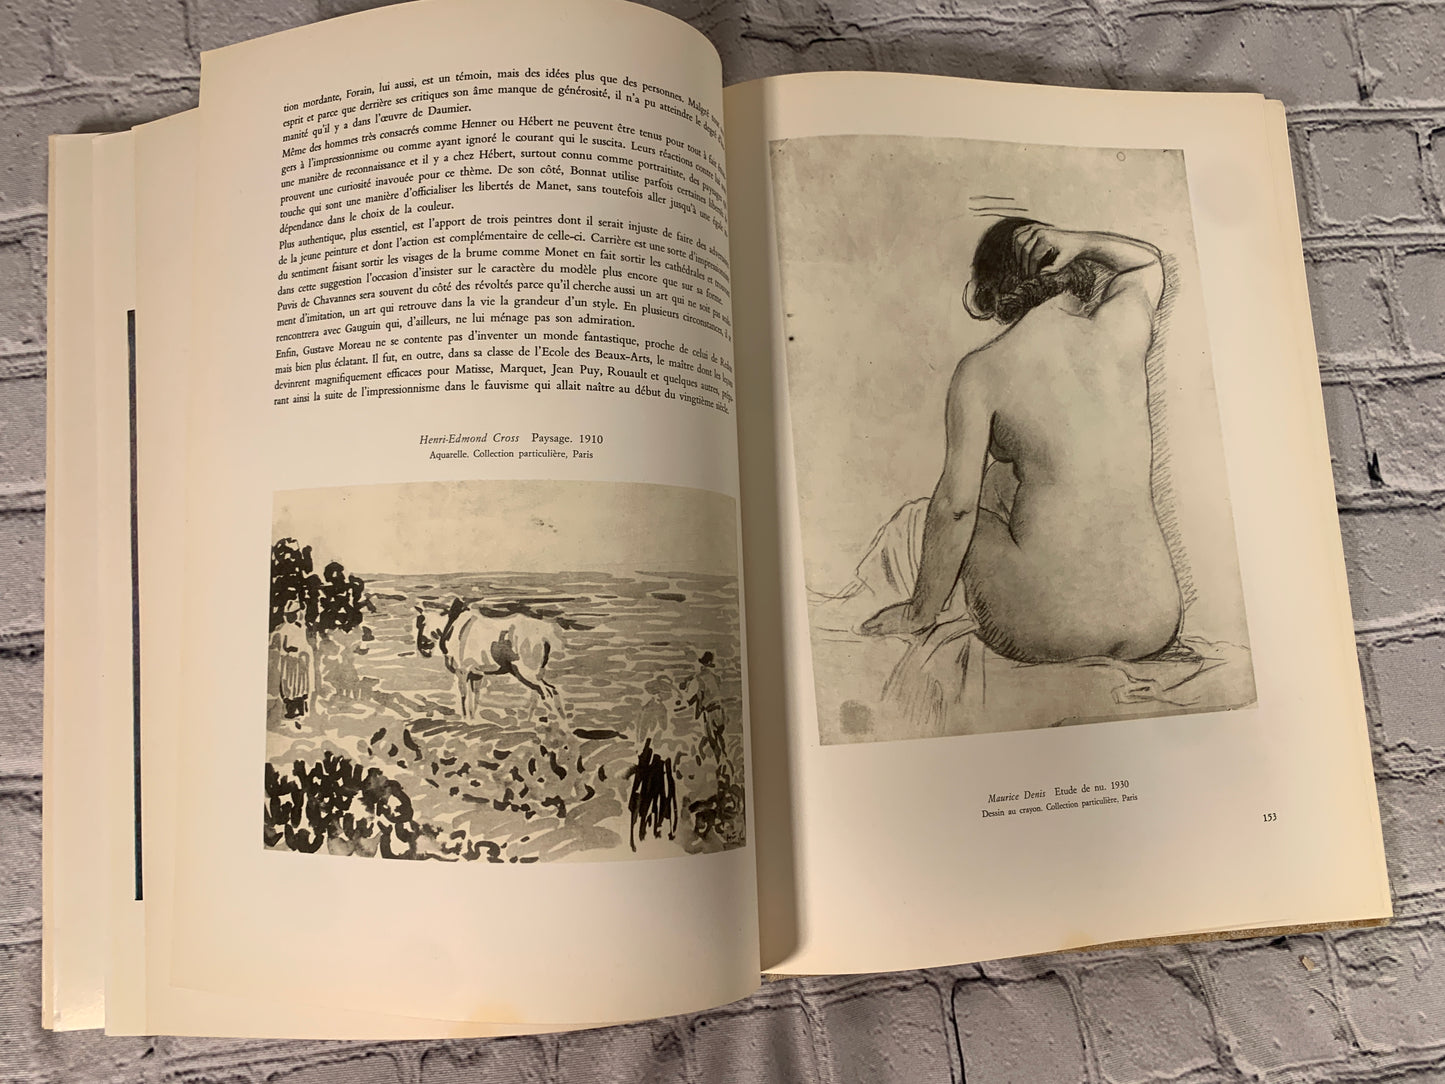 Le Siecle des Impressionnistes (Century of the Impressionists) by Raymond Cogniat [1967]